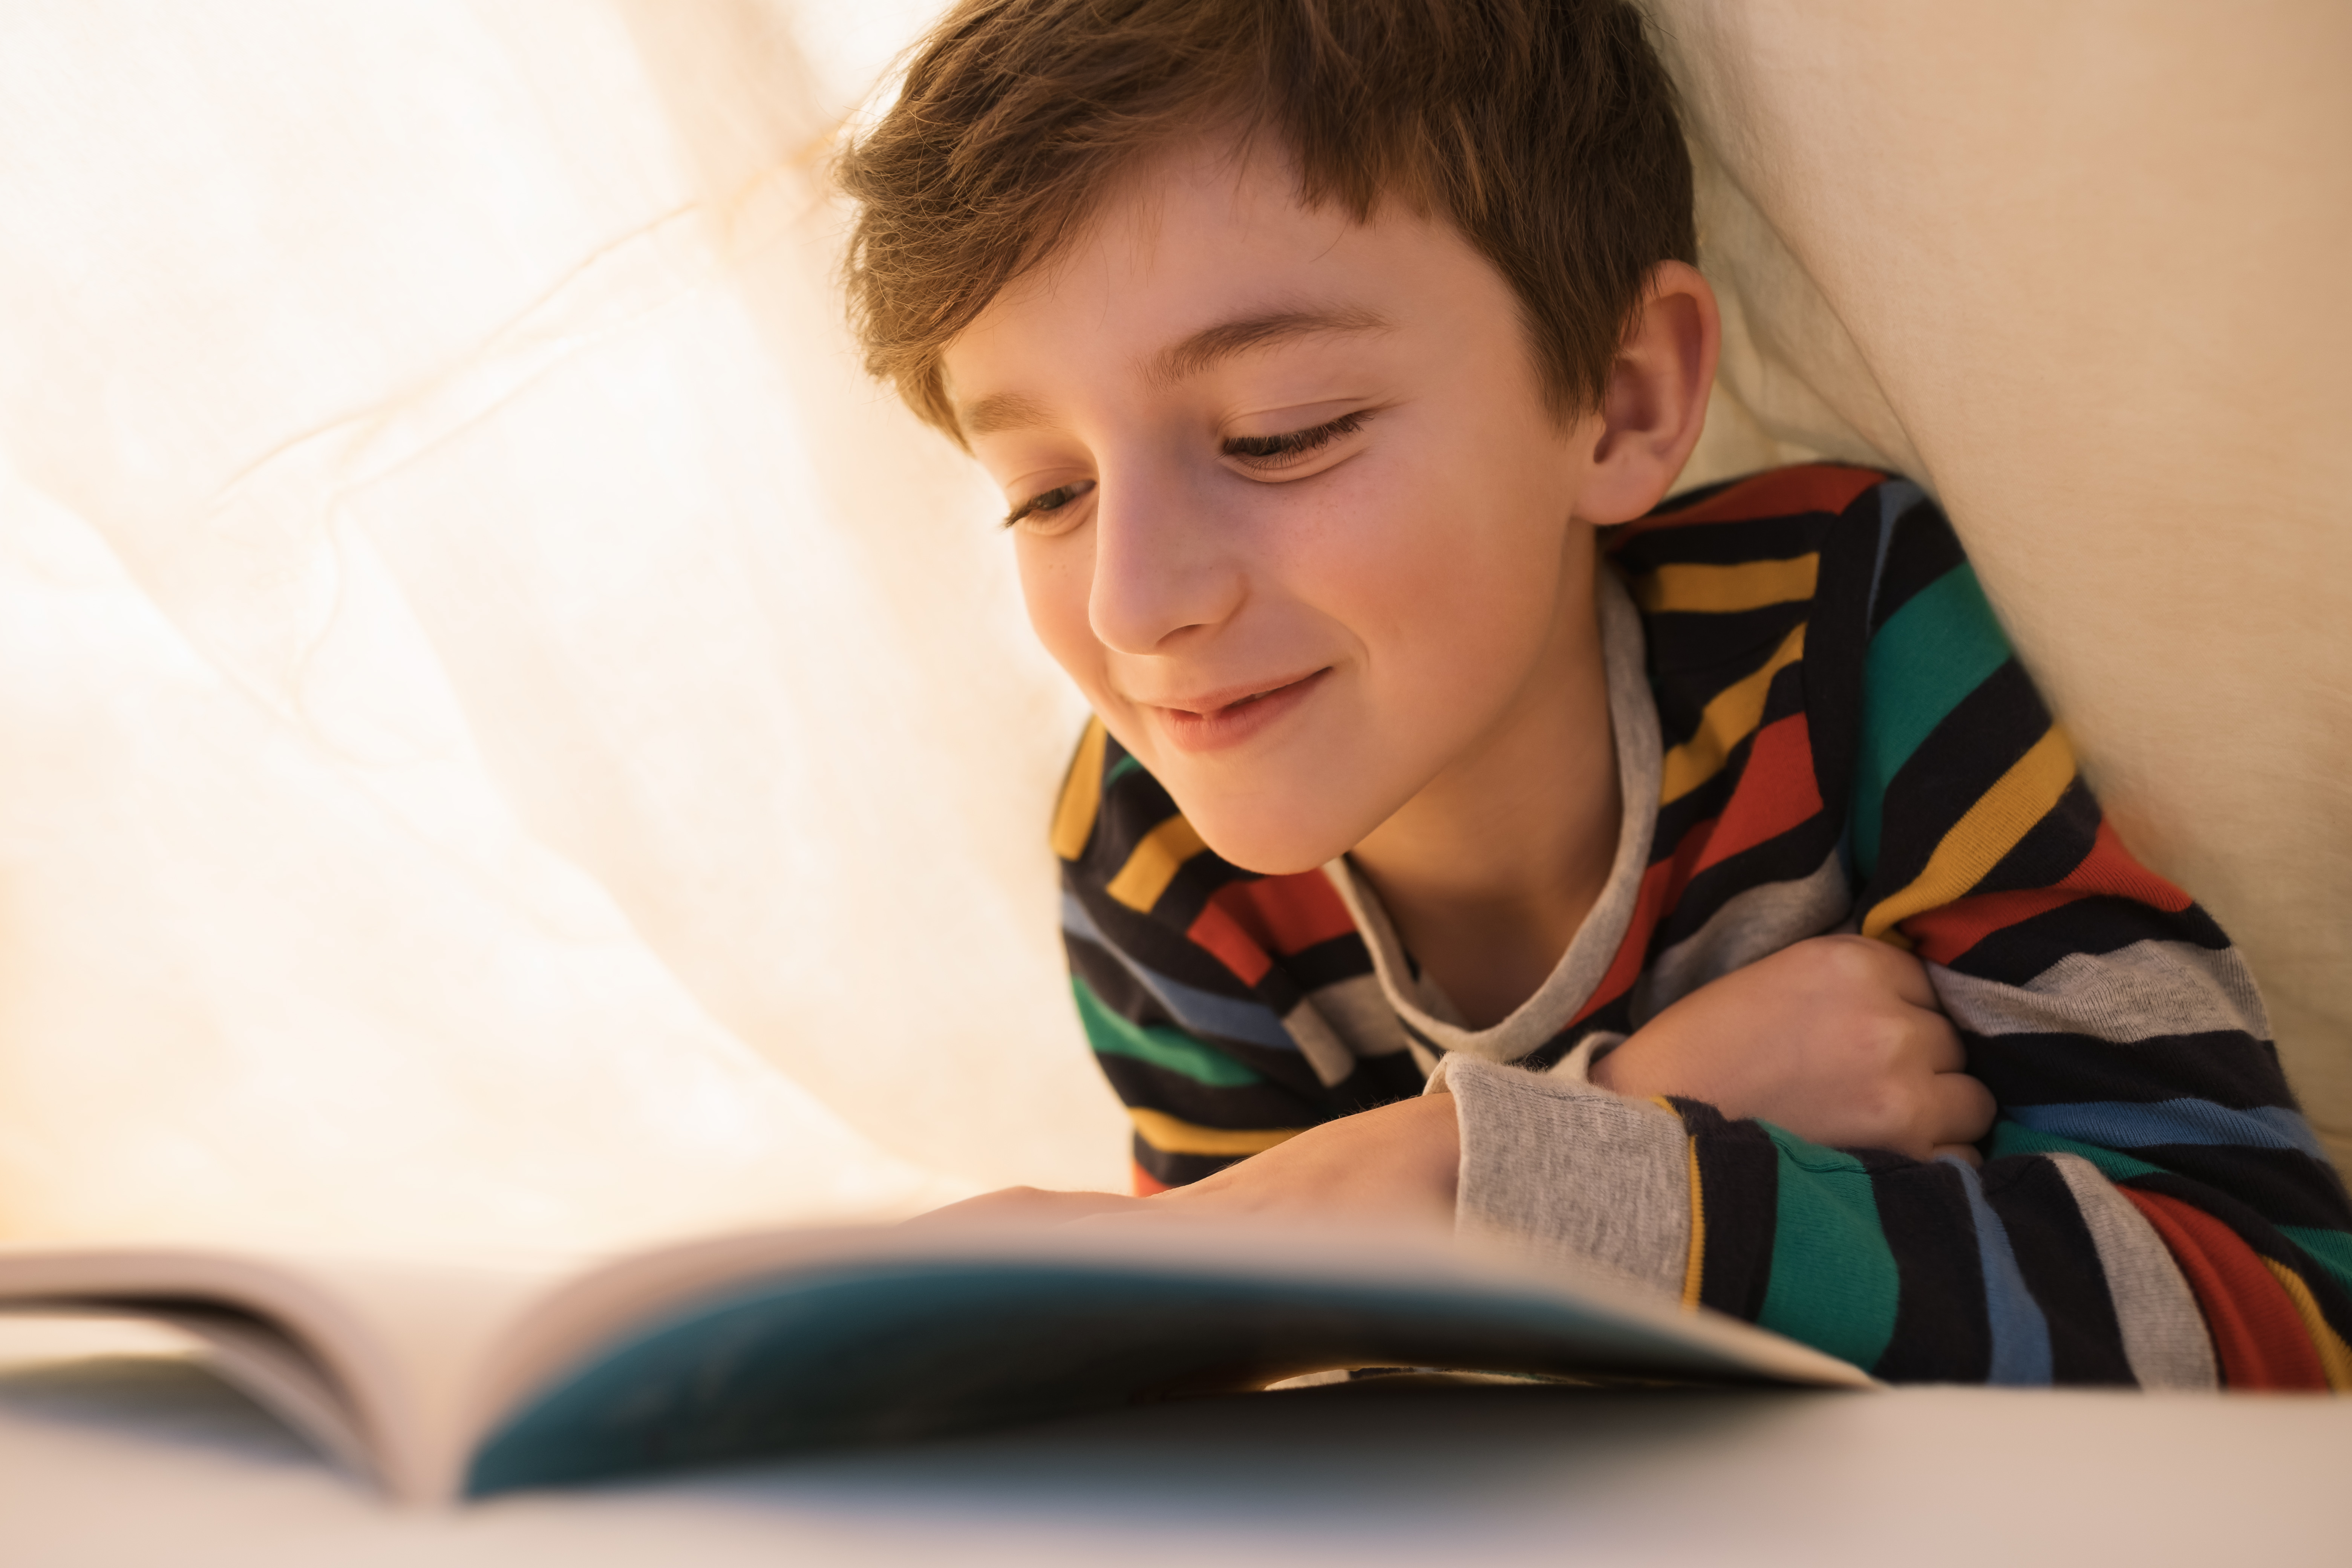 Kid reading under sheet covers in bed